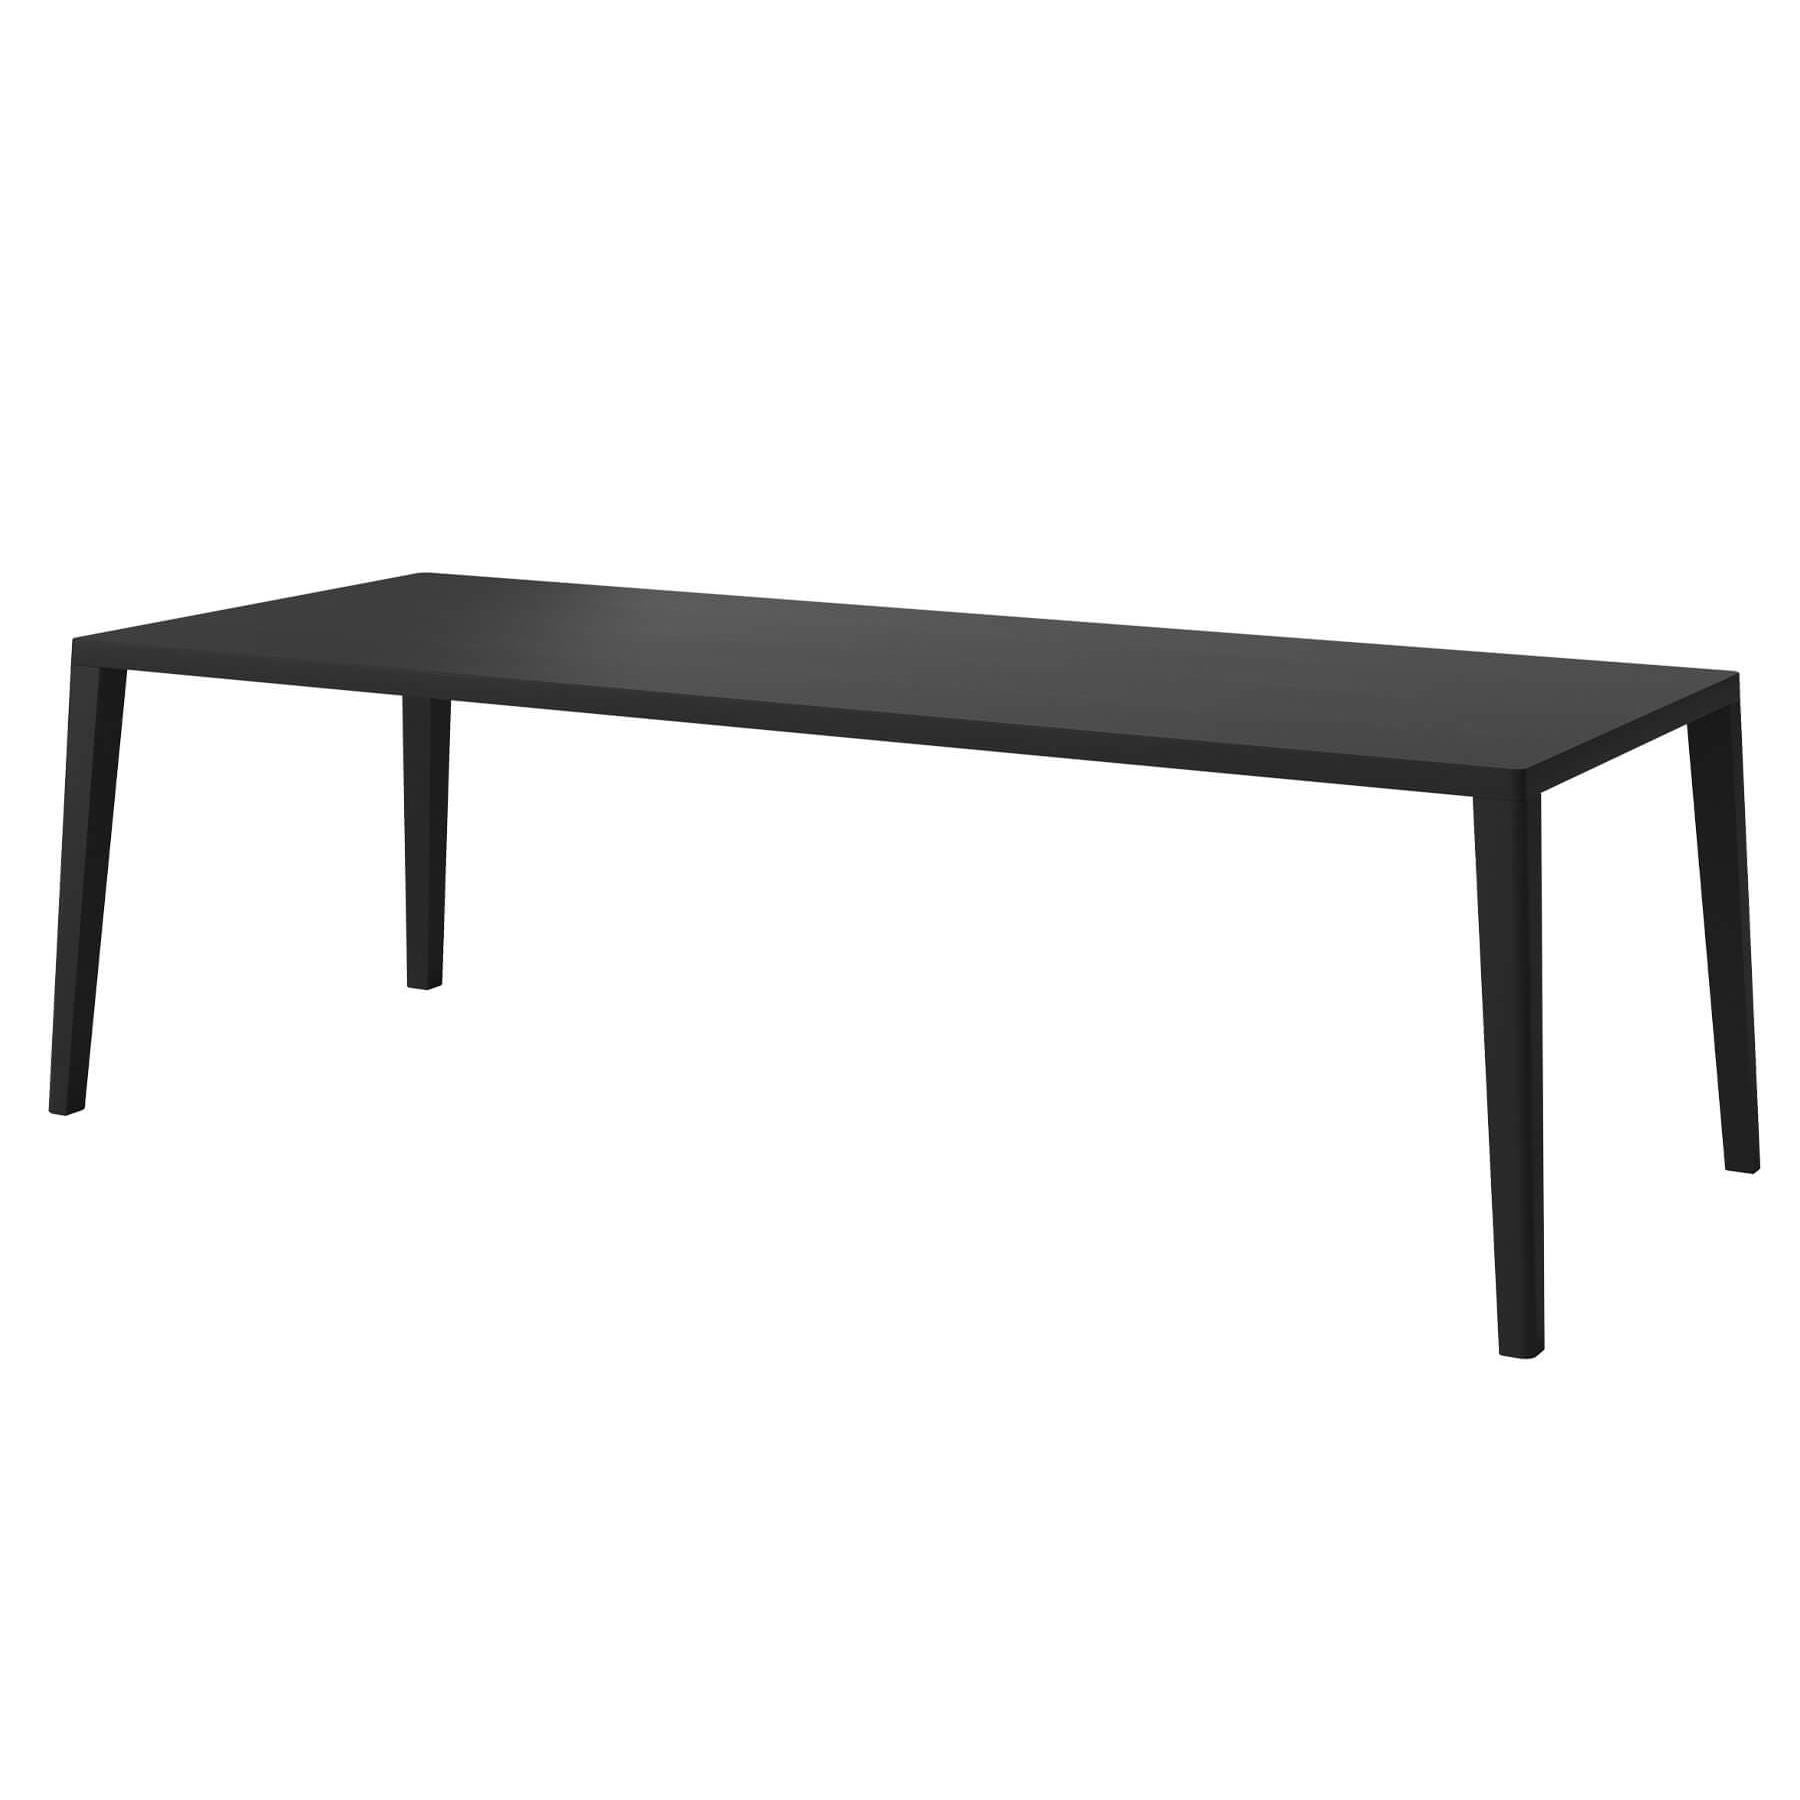 Bolia Graceful Dining Table 240 X 95cm Black Stained With Extension Leaves Designer Furniture From Holloways Of Ludlow